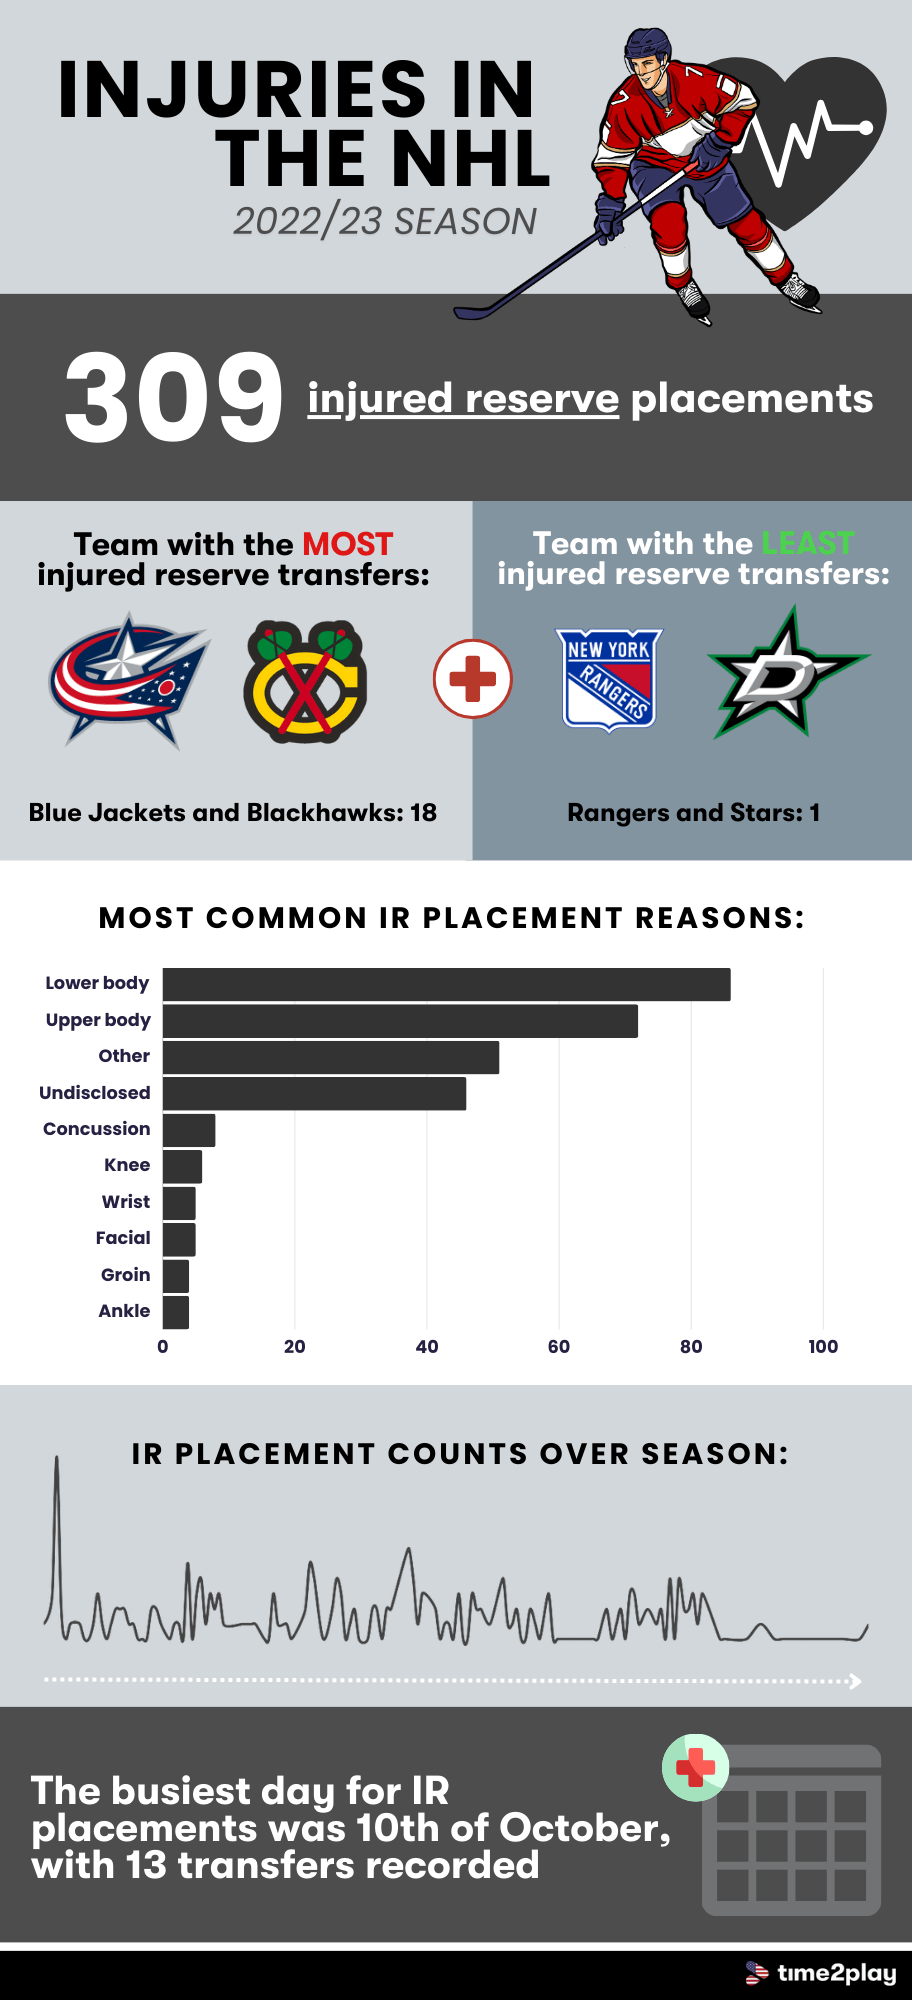 The following image is an infographic presenting data related to the 2022/2023 injured reserve list for the NHL